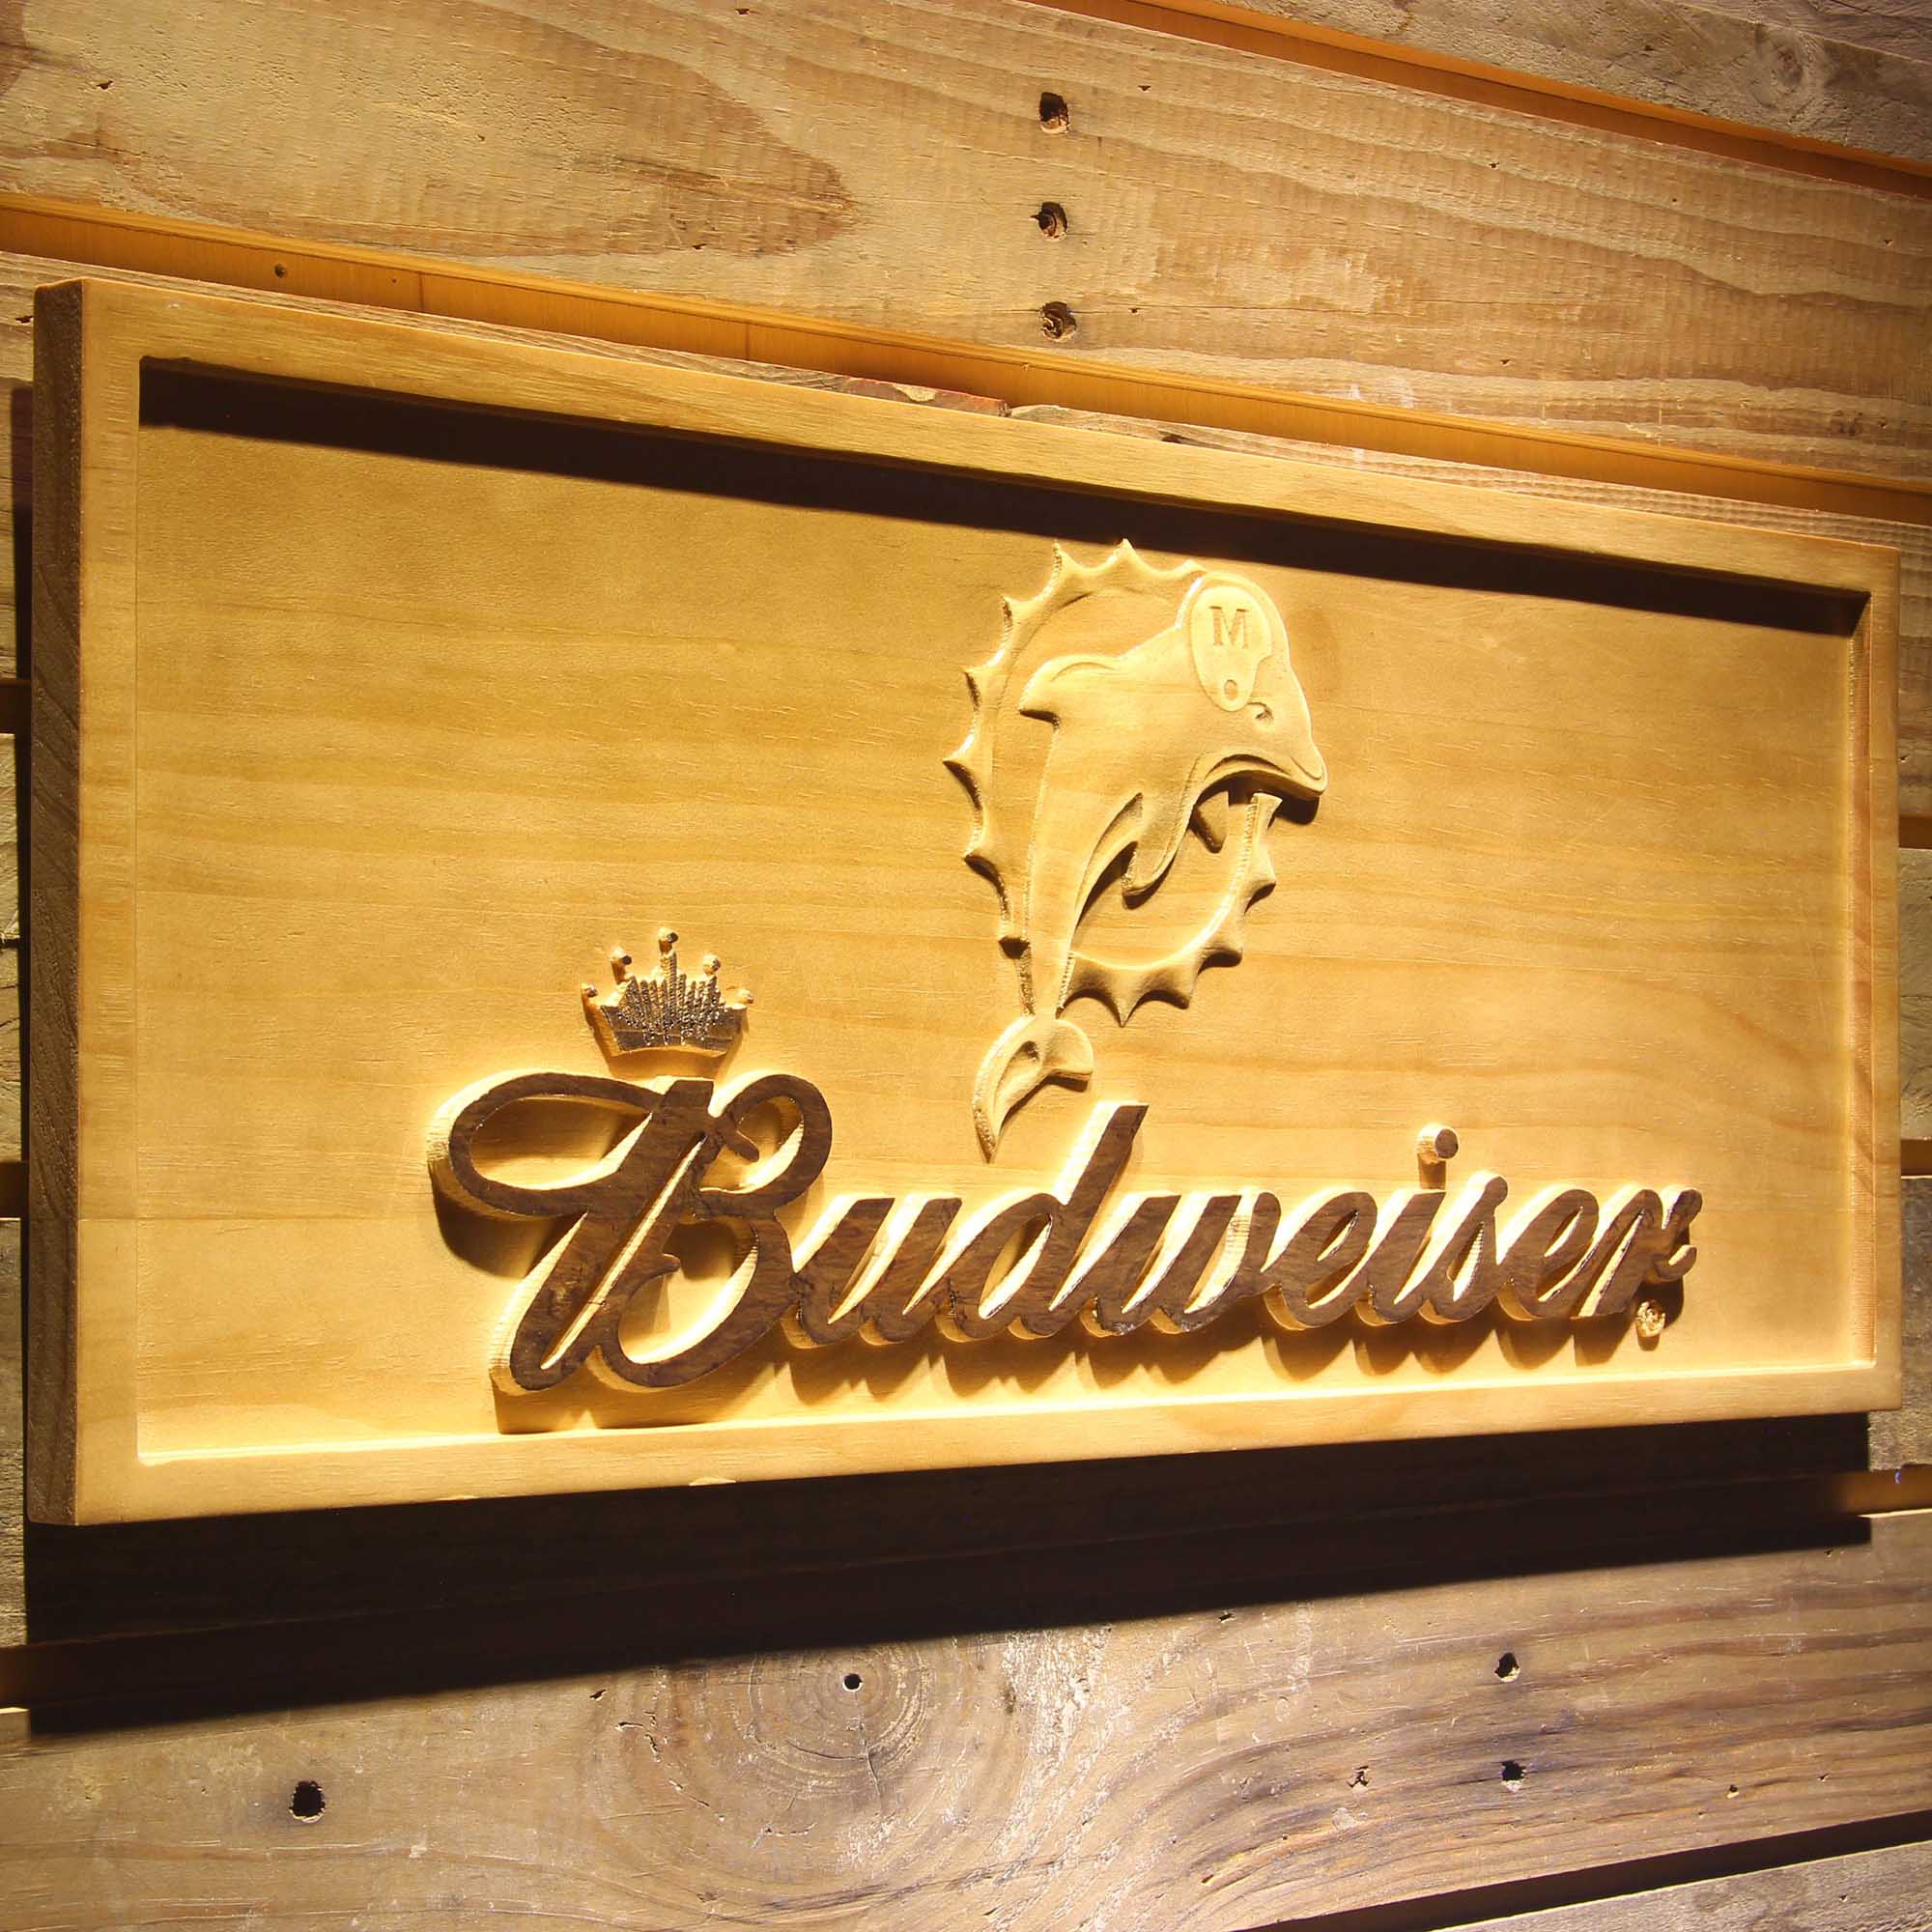 Miami Dolphins Budweiser Beer Pub 3D Wooden Engrave Sign